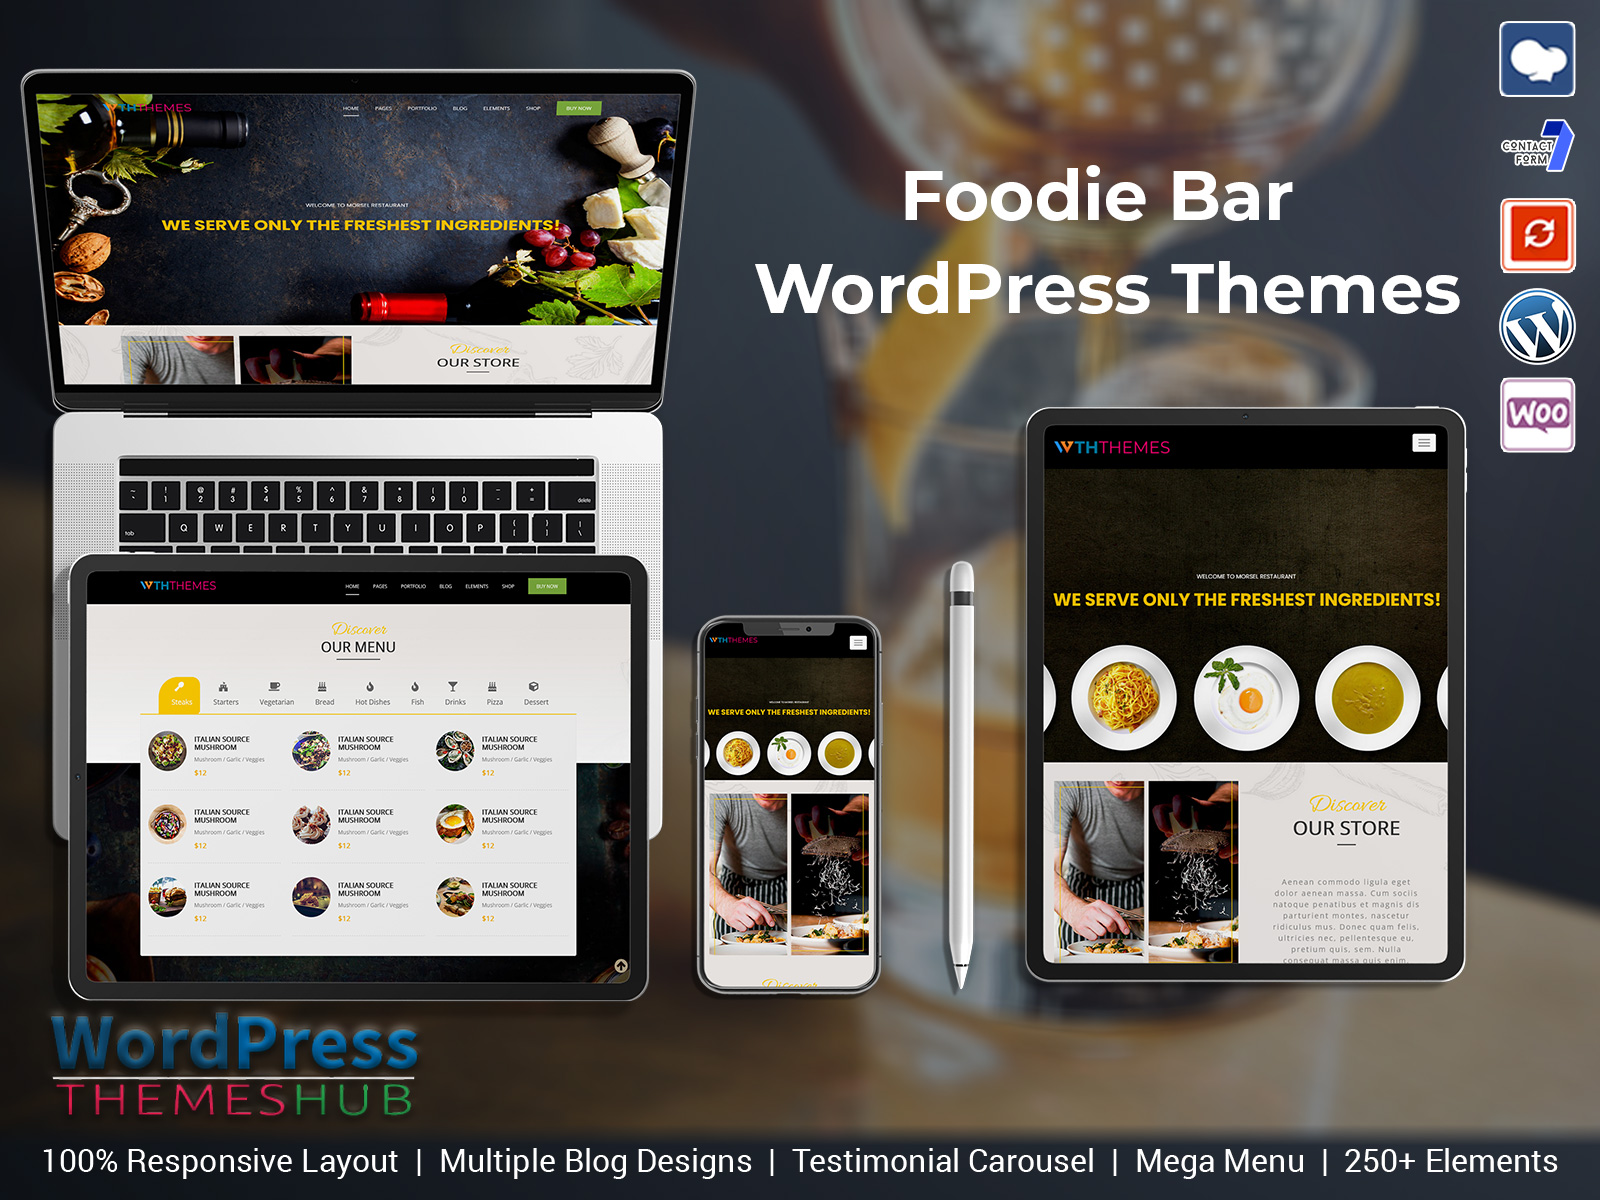 Foodie Bar WordPress Themes For Food-Related Websites